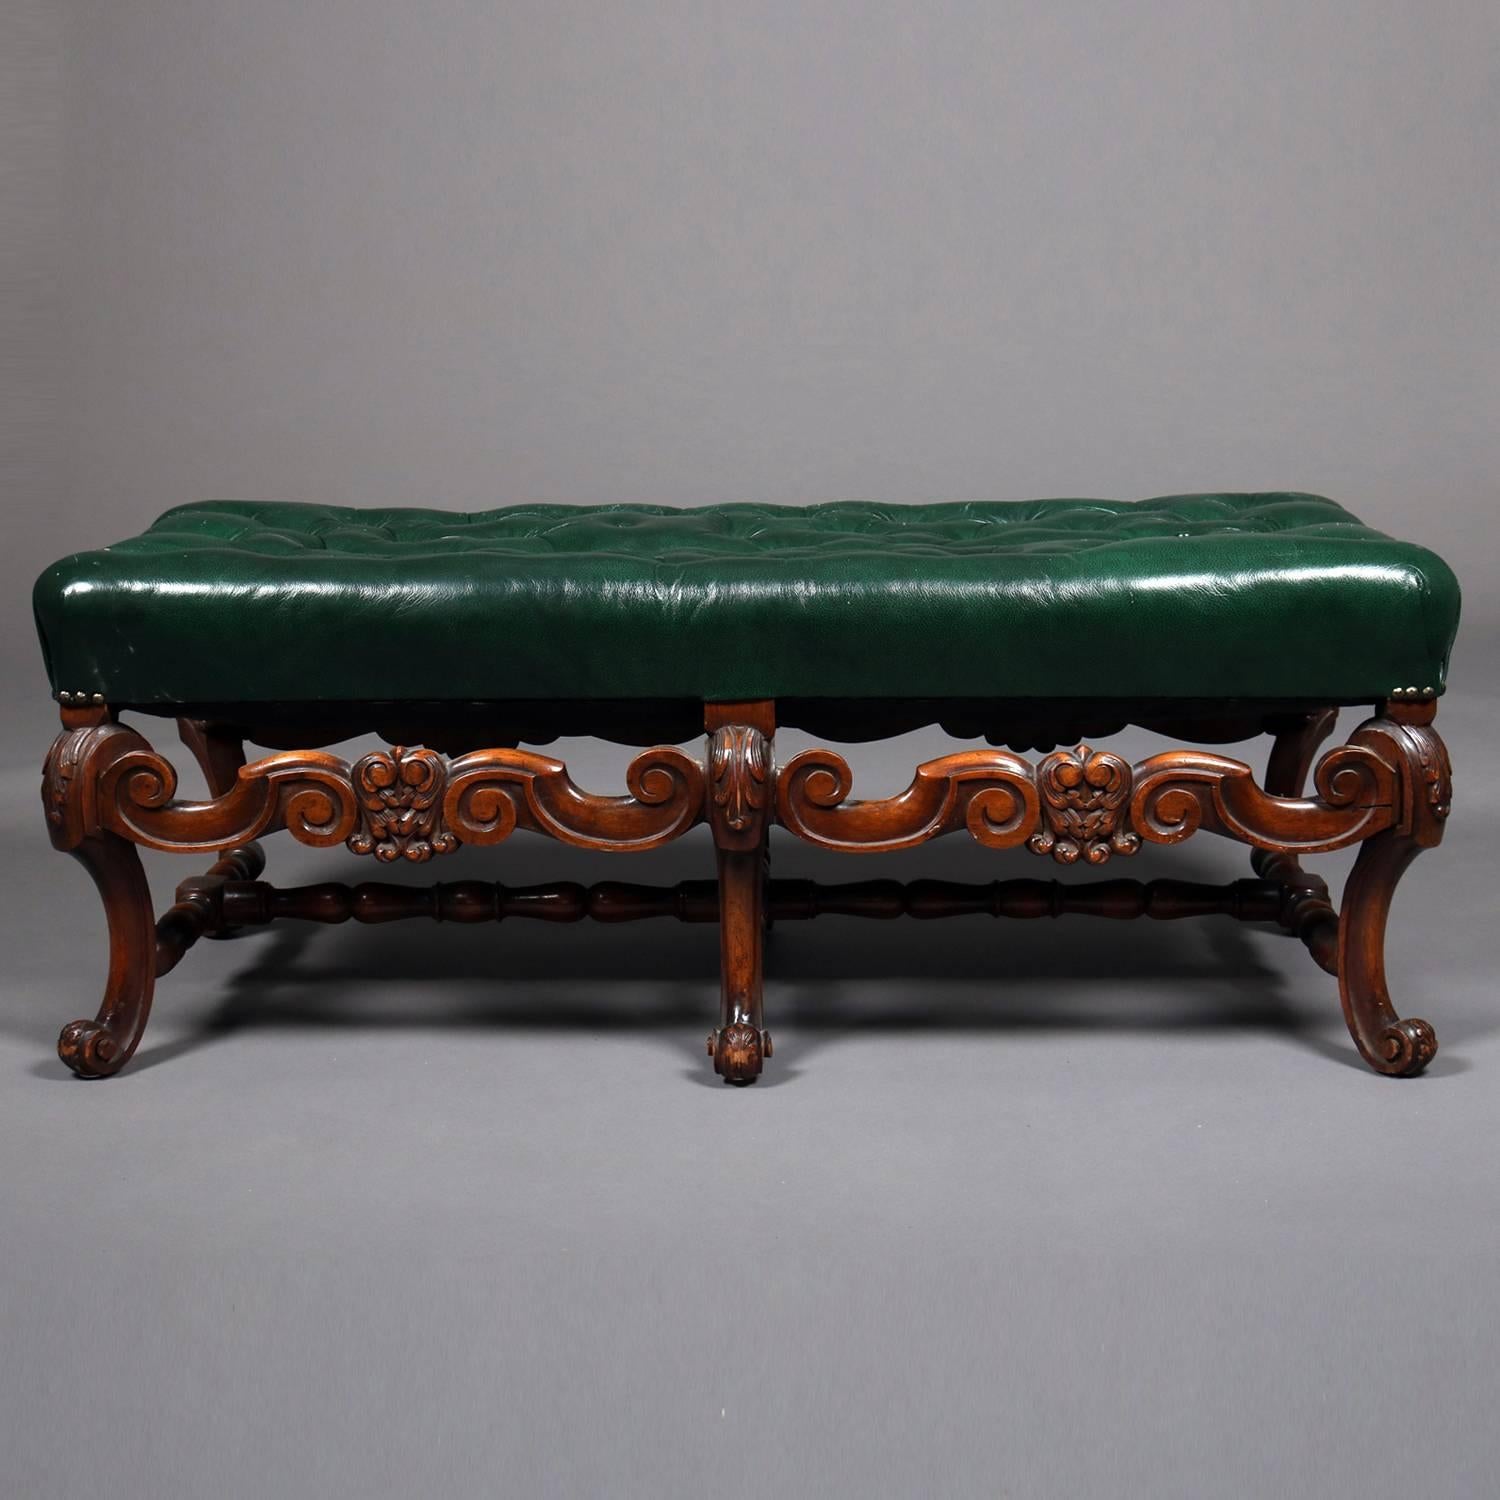 Kittinger style Continental bench features button tufted green leather upper over carved walnut frame with six scroll form cabriole legs, circa 1900

Measures: 16